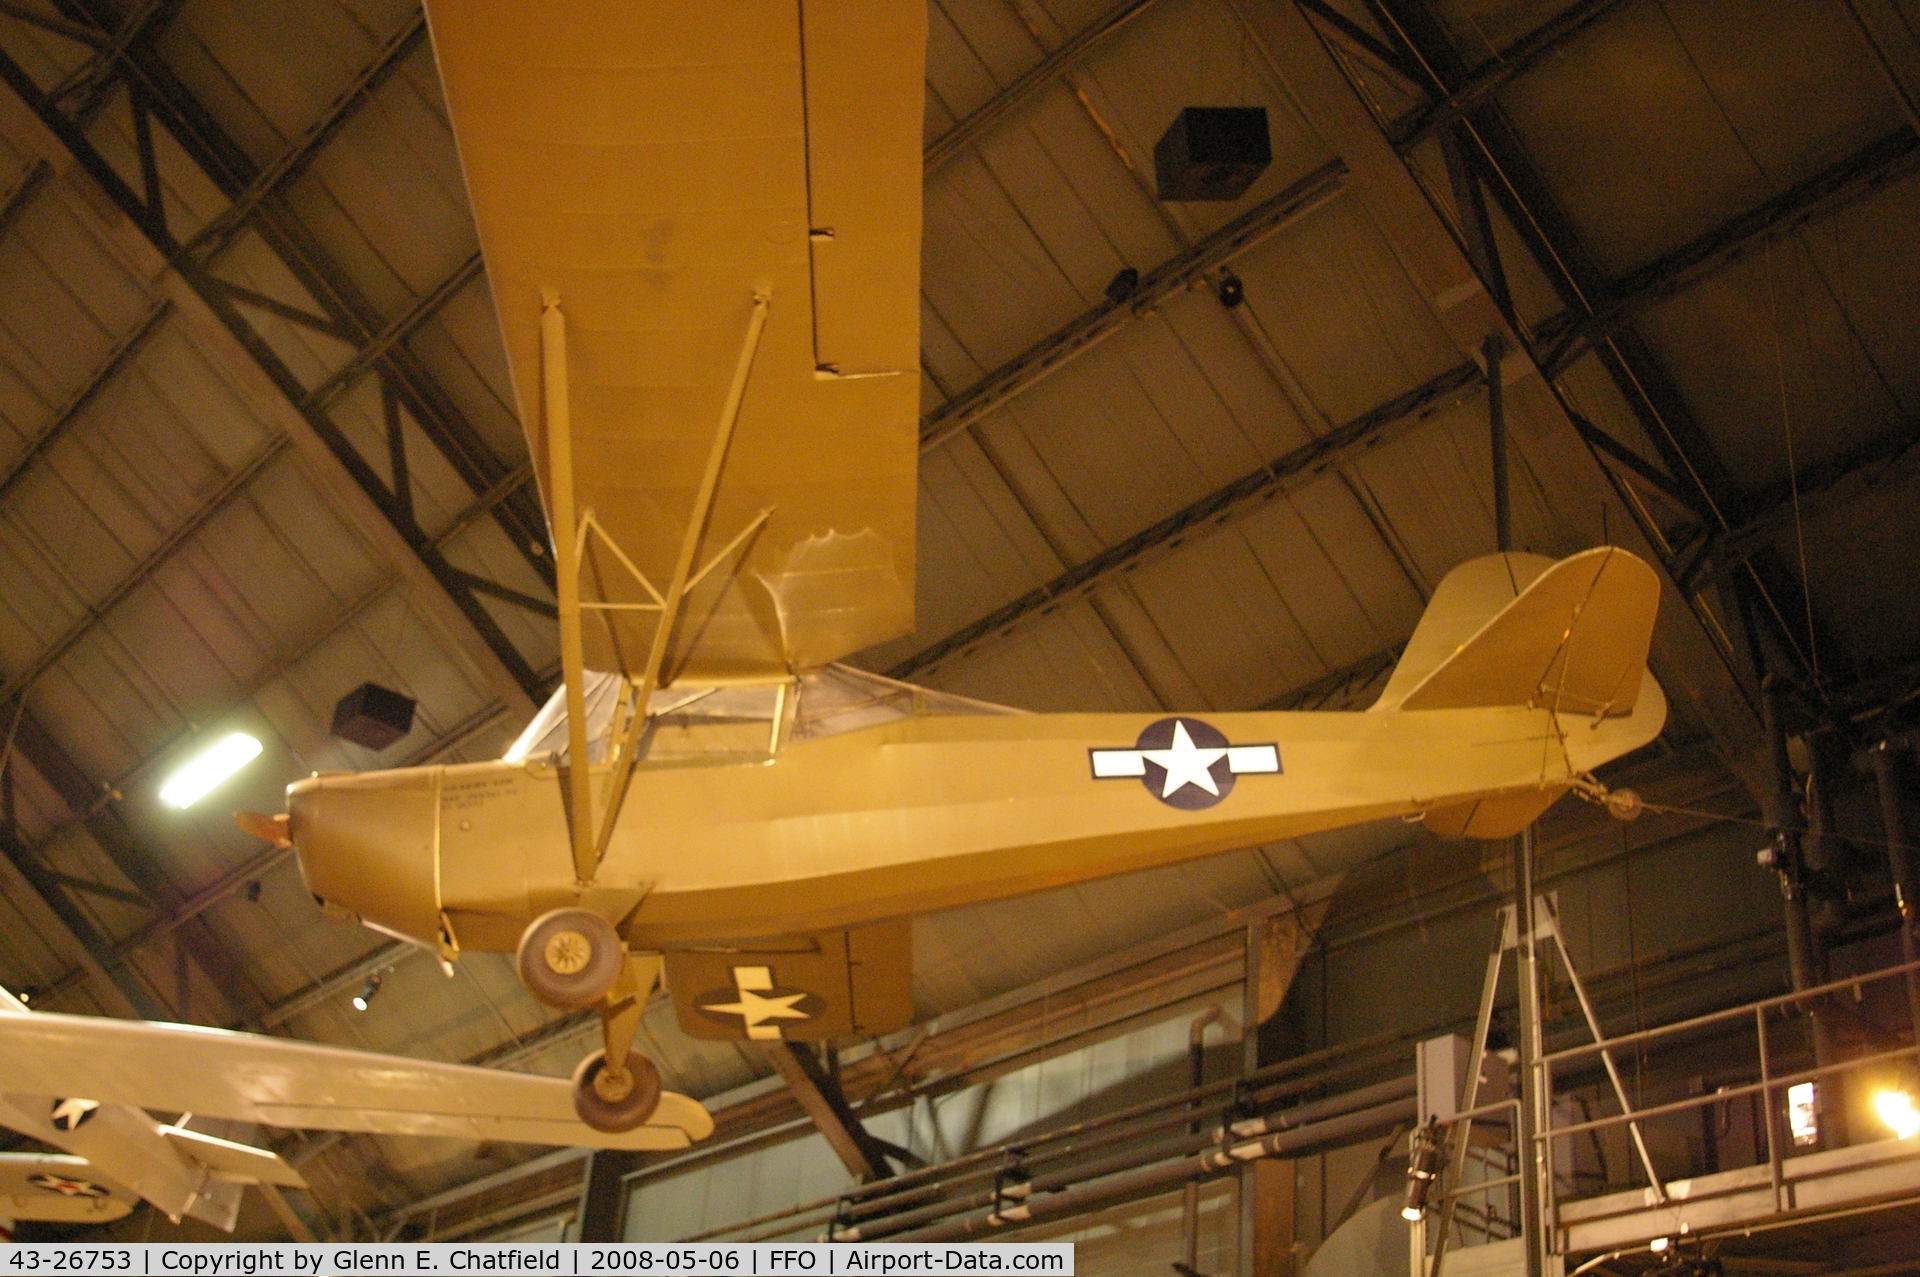 43-26753, 1943 Taylorcraft L-2M Grasshopper C/N L-6065?, Hanging from the ceiling in the National Museum of the U.S. Air Force